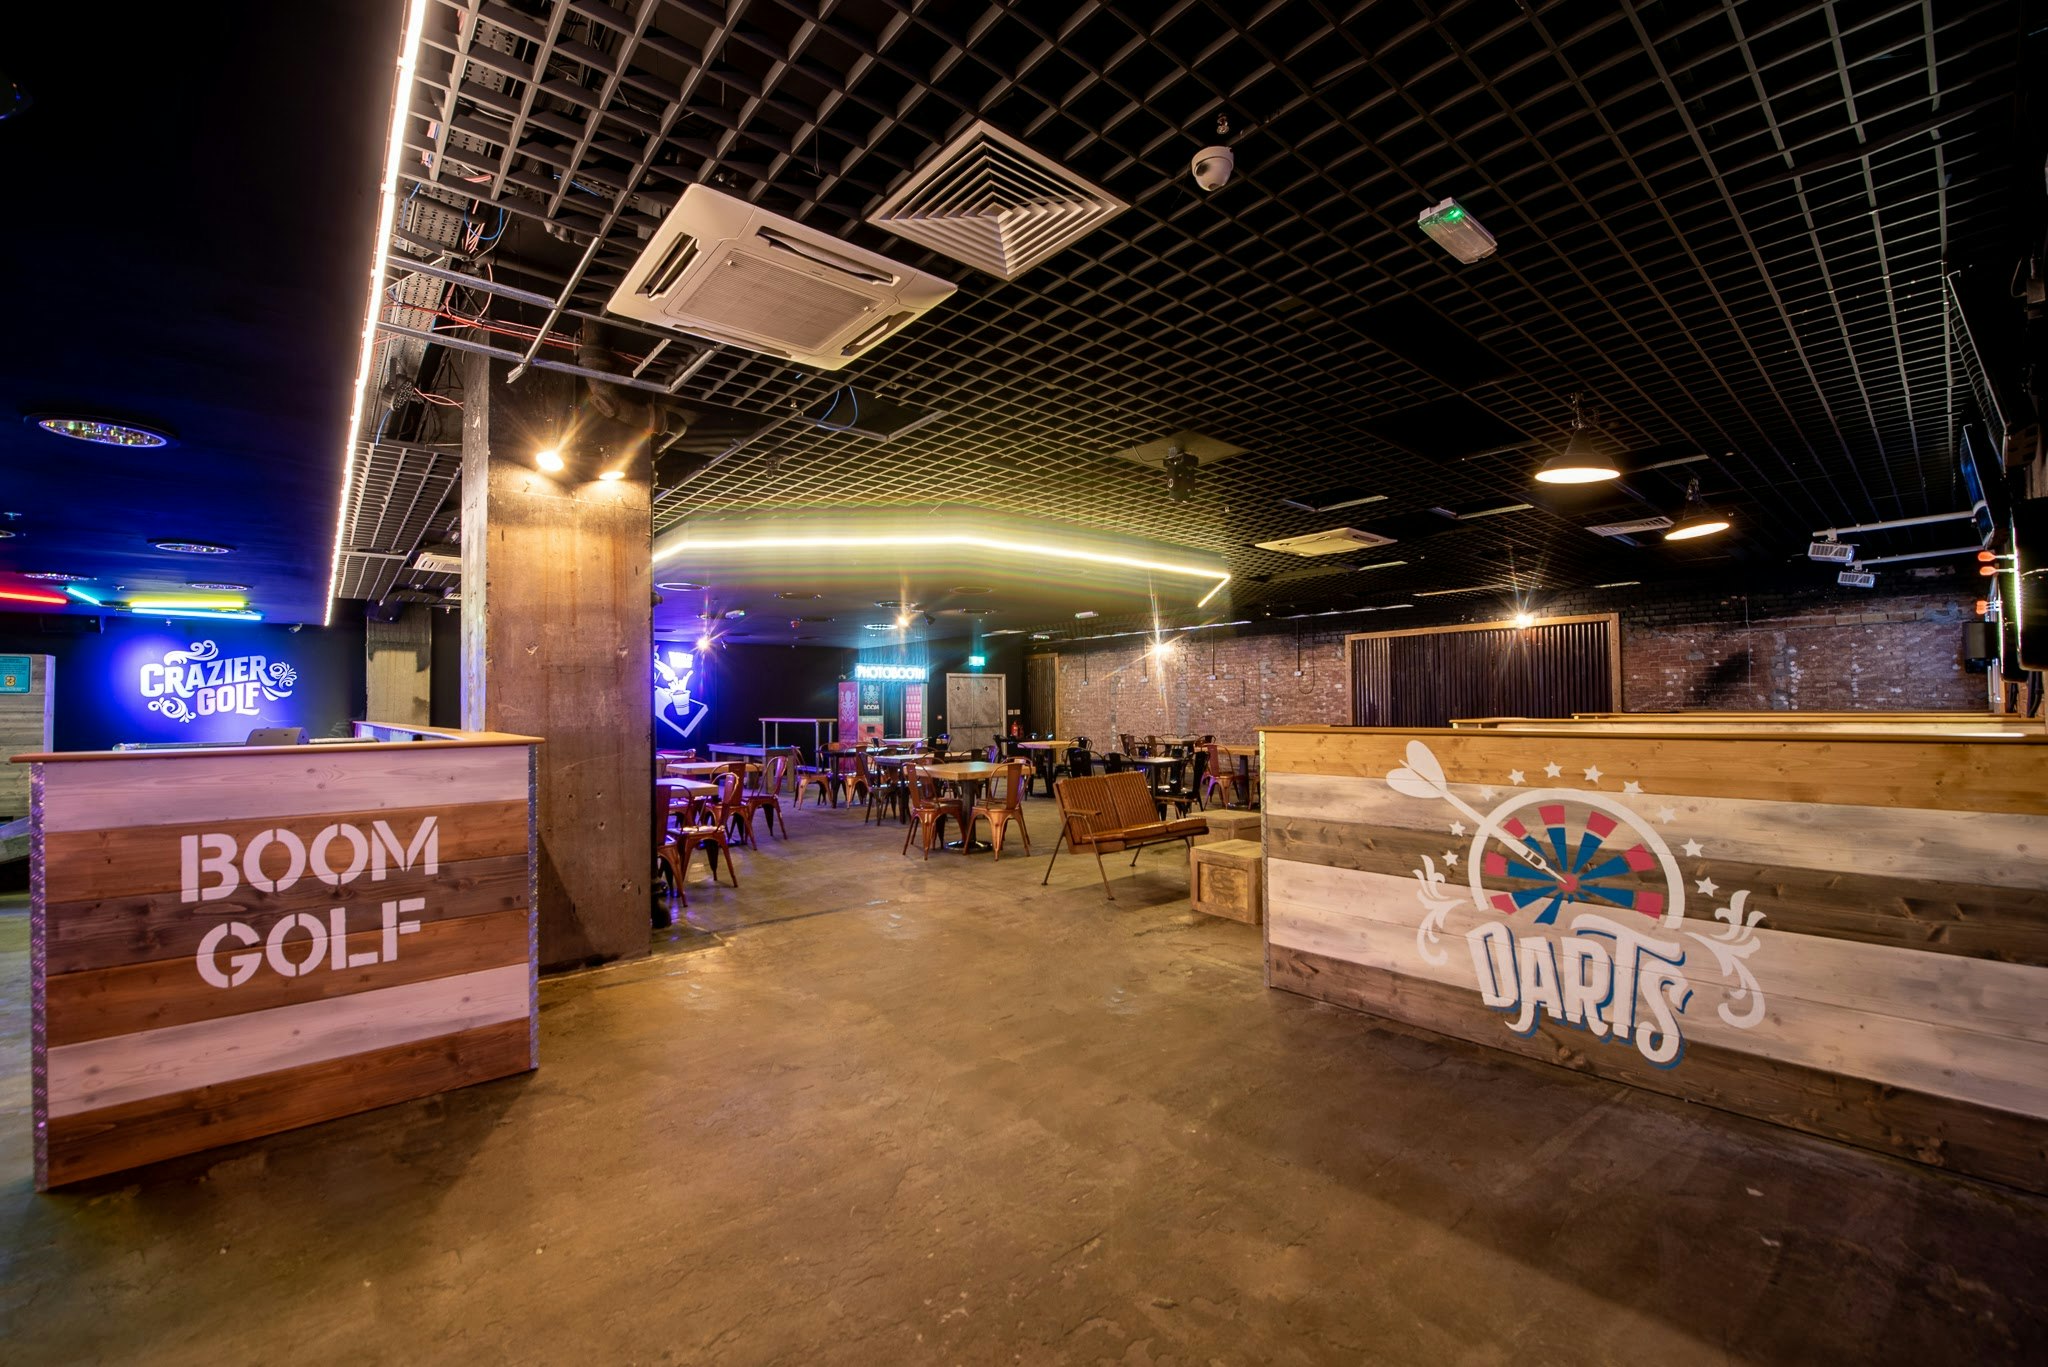 Office Party Venues in Liverpool - Boom Battle Bar